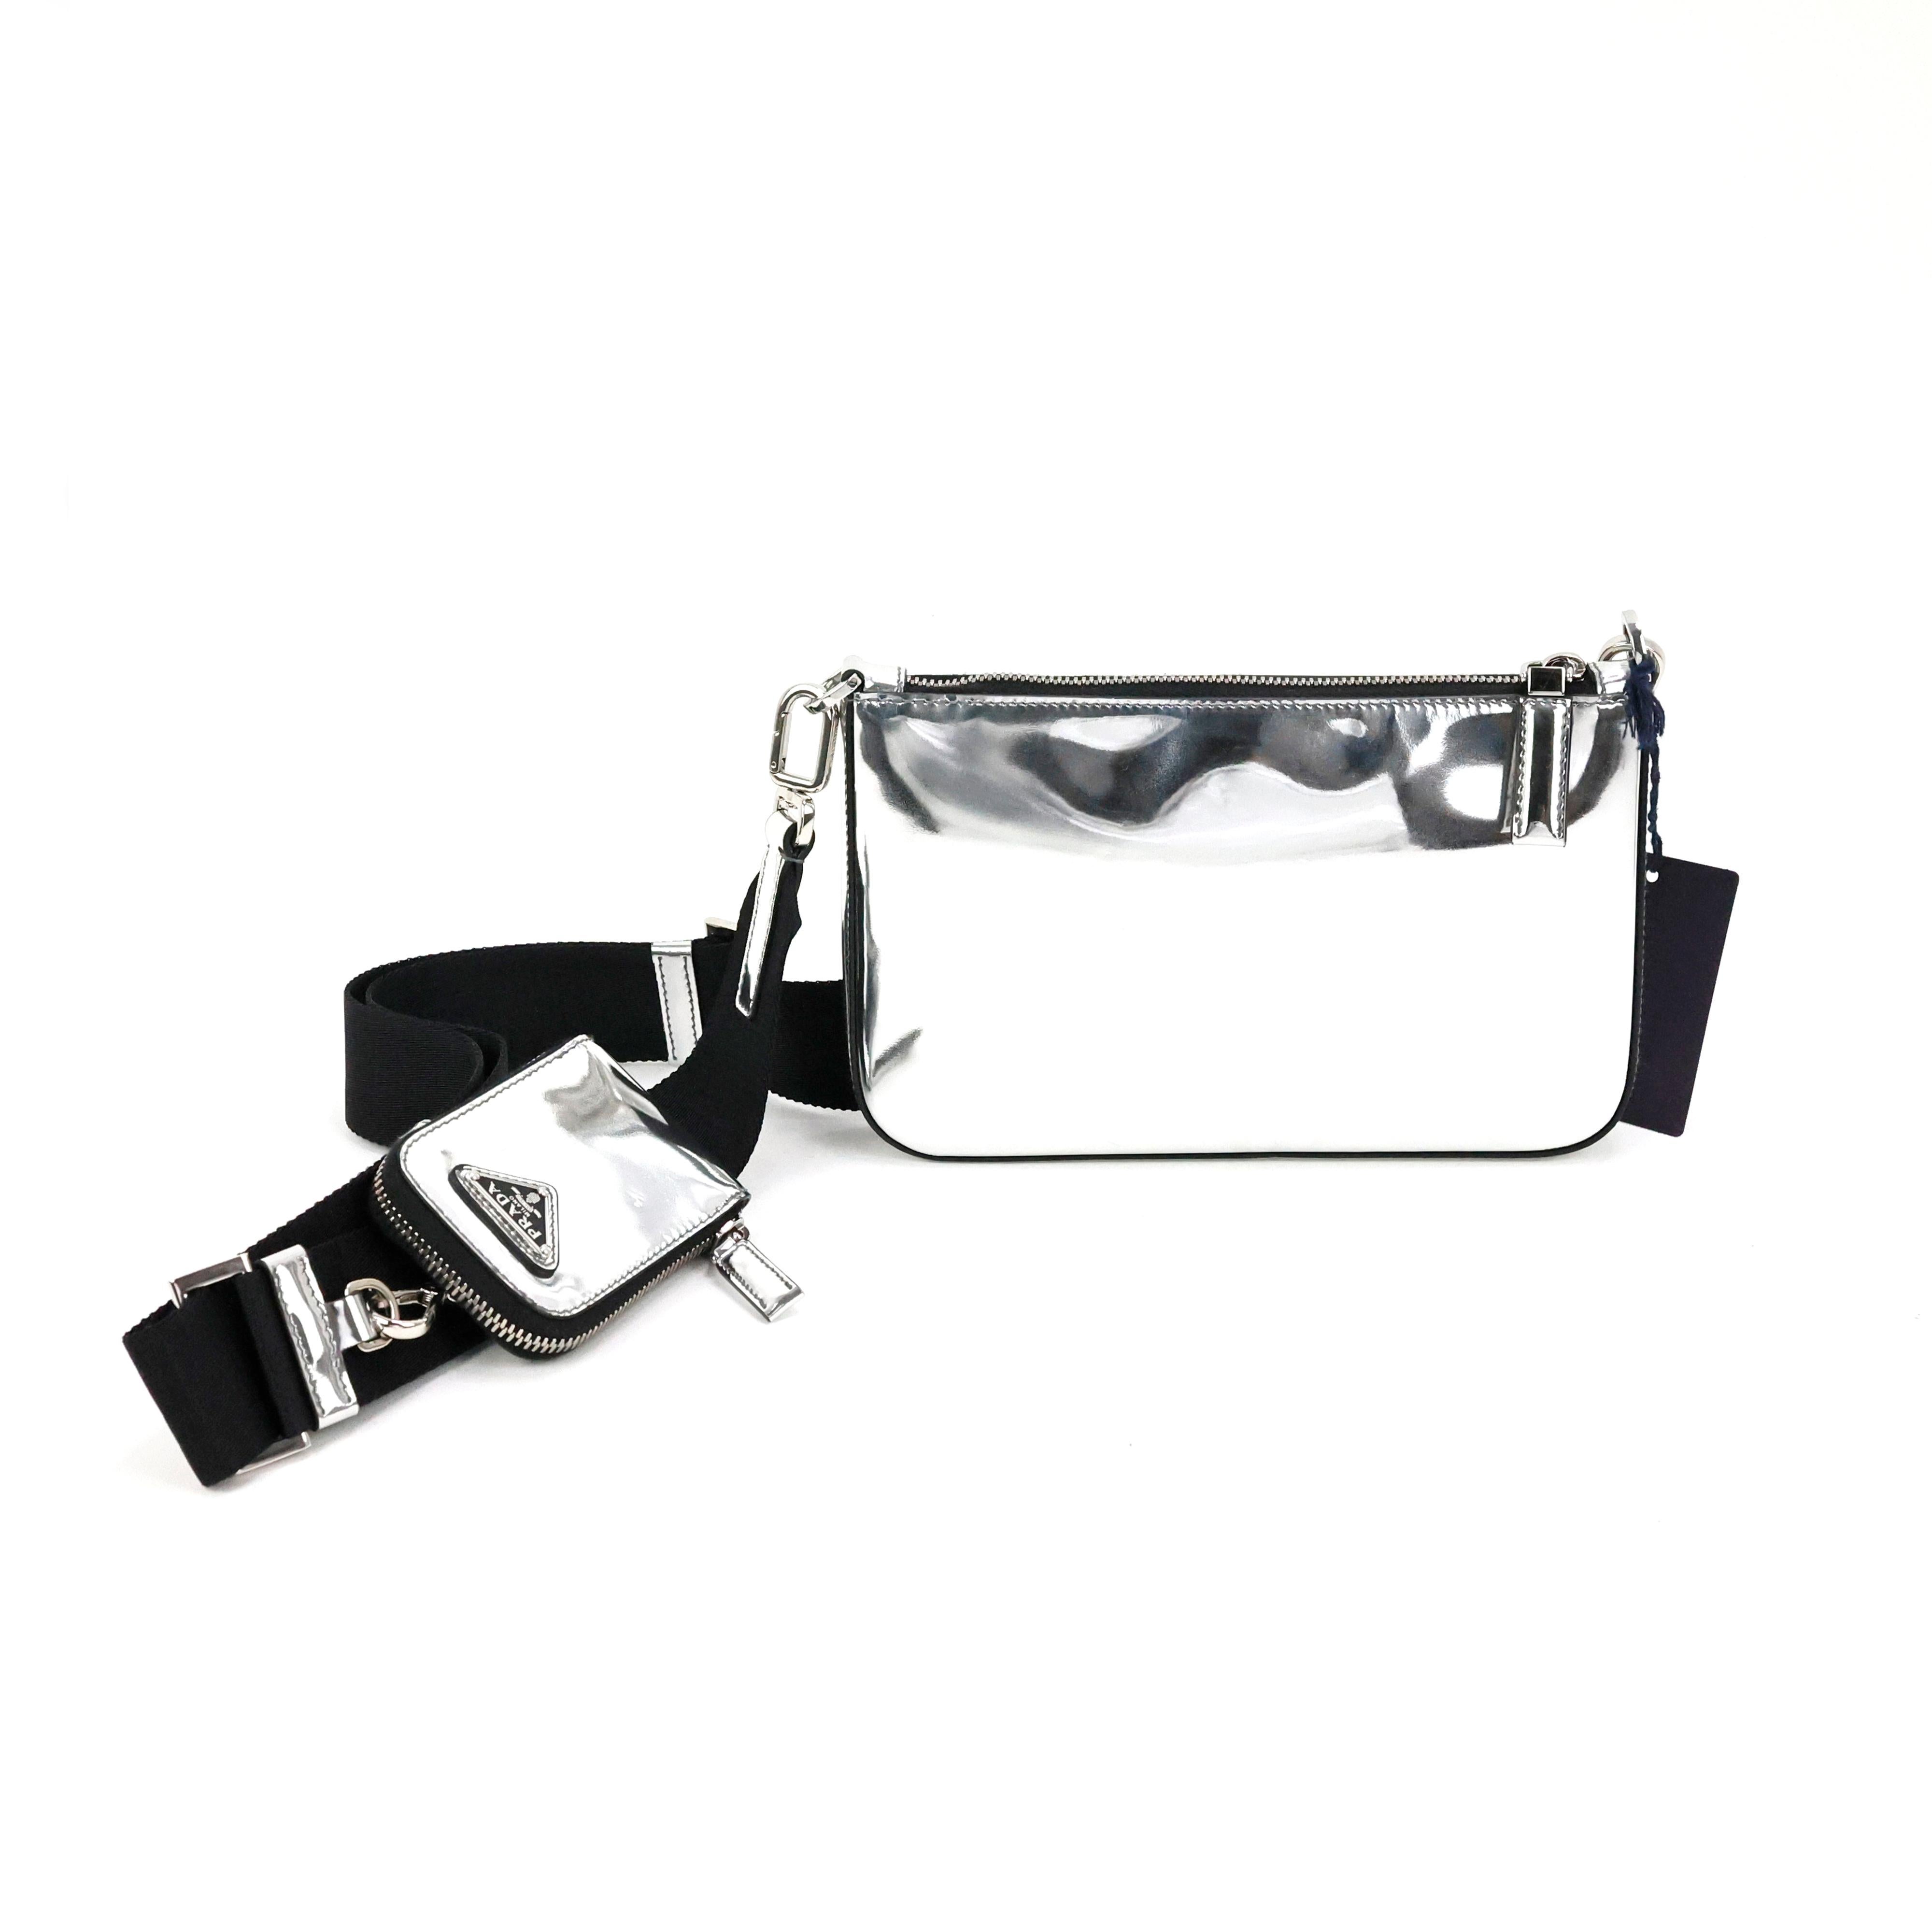 Prada crossbody bag in spazzolato leather color silver.

Condition:
Really good. To note: only few small flaws on leather, please check the pictures.

Packing/accessories:
Box, tag, dustbag, authenticity card.

Measurements:
22cm x 14cm x 3cm.